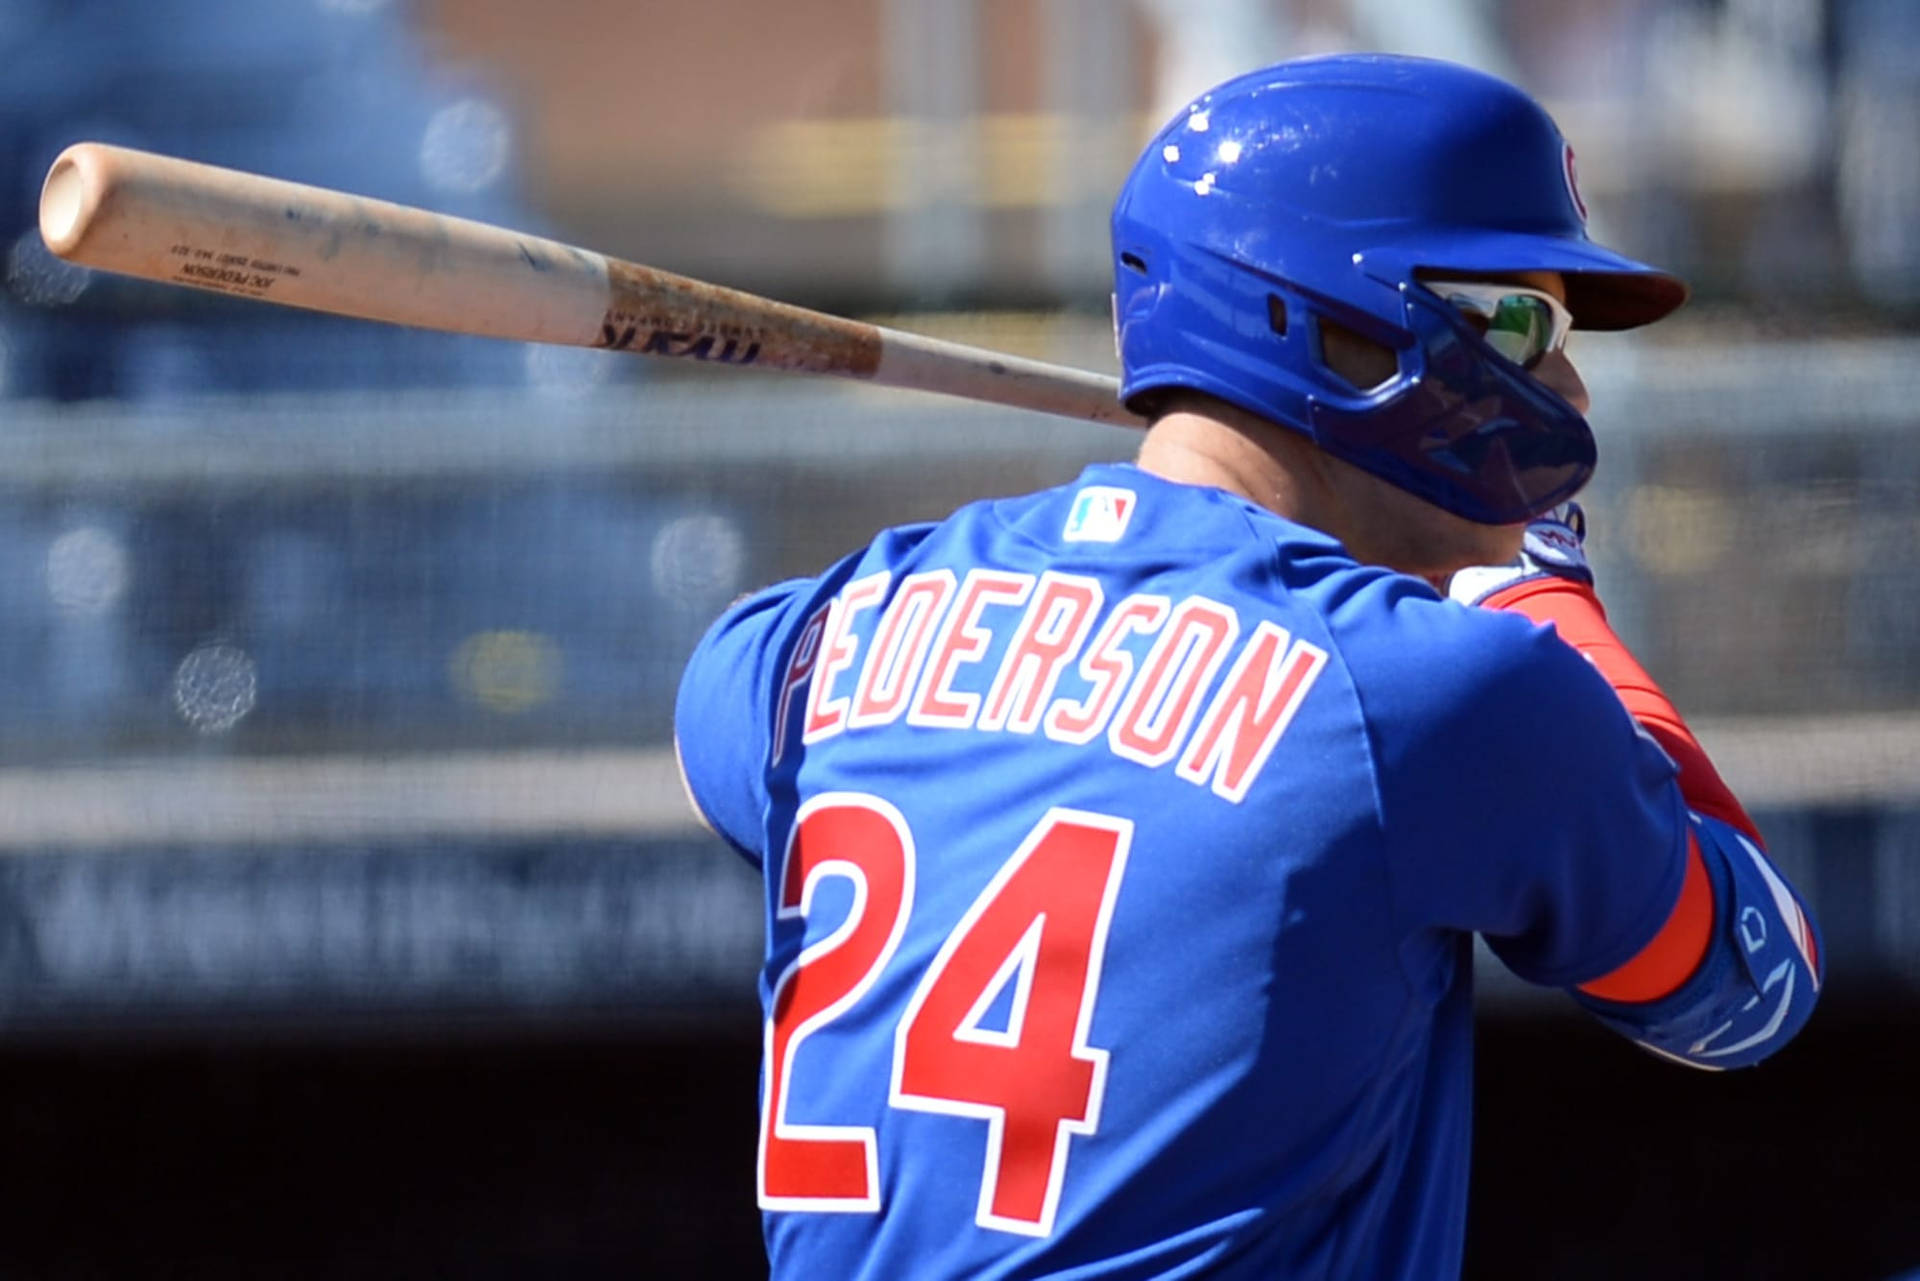 Jocpederson Jersey 24 In Spanish Could Be Translated As 